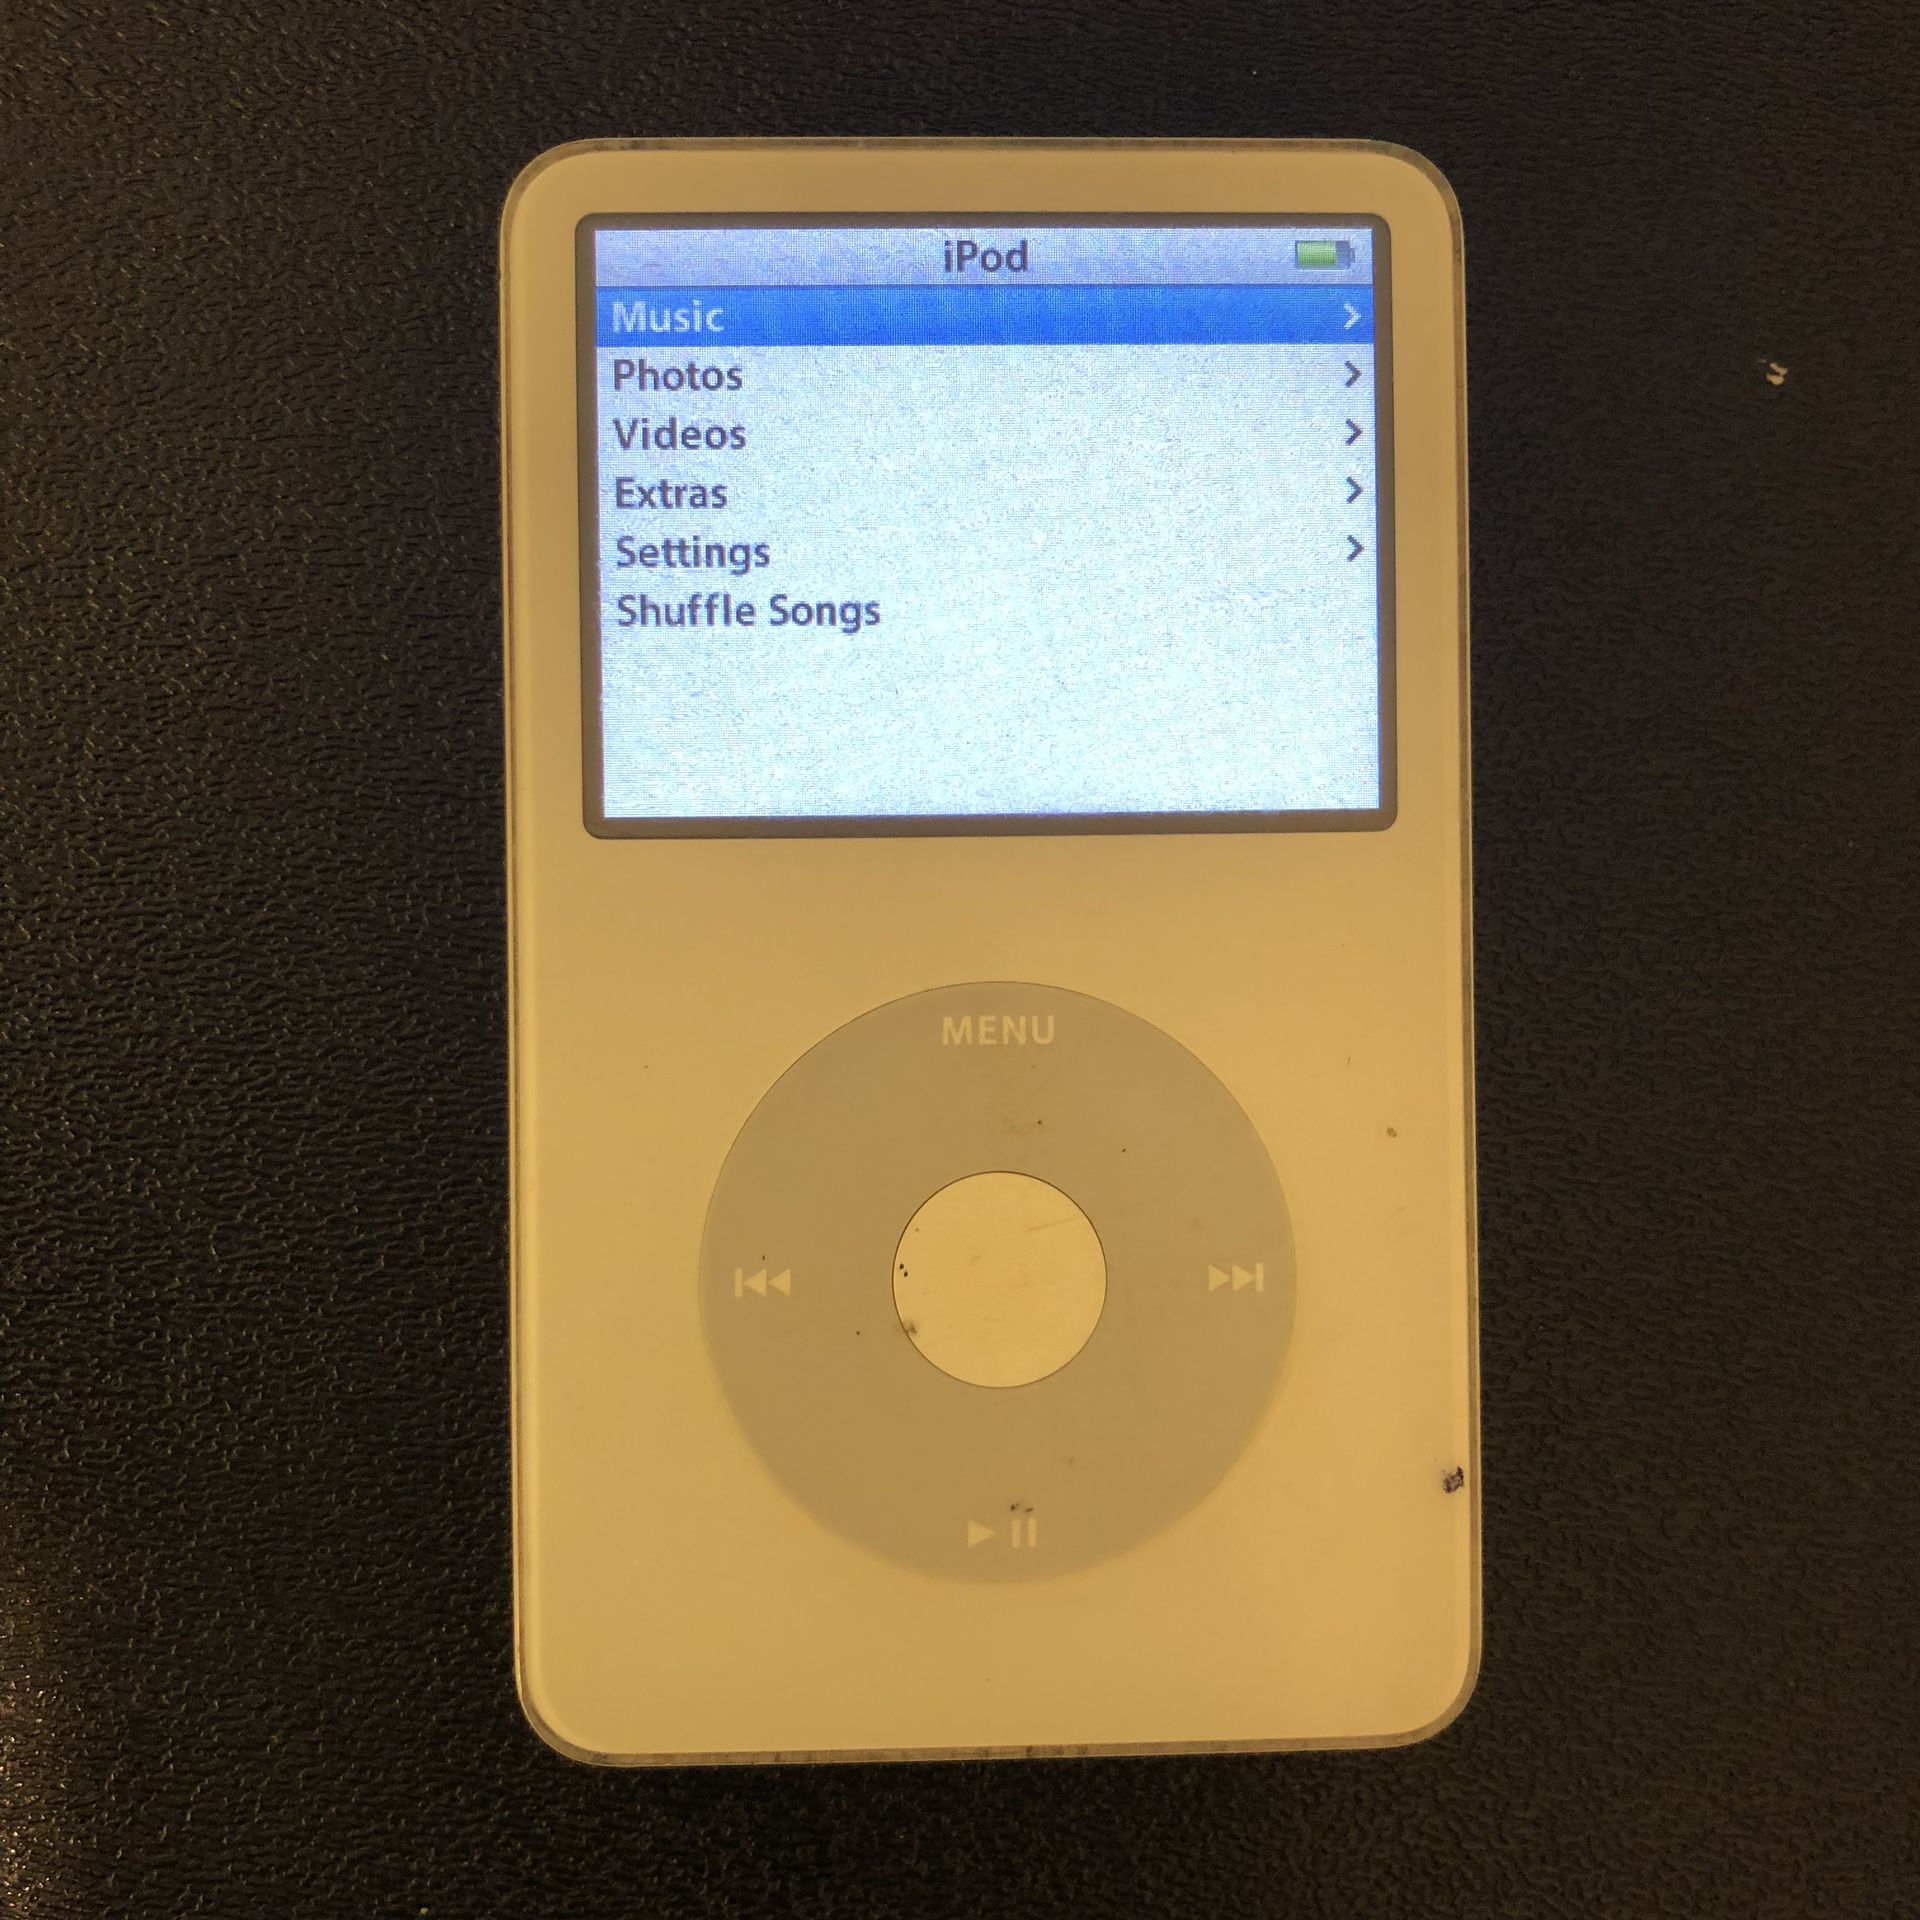 Apple iPod Classic Model A1136 5th Generation 30gb White for